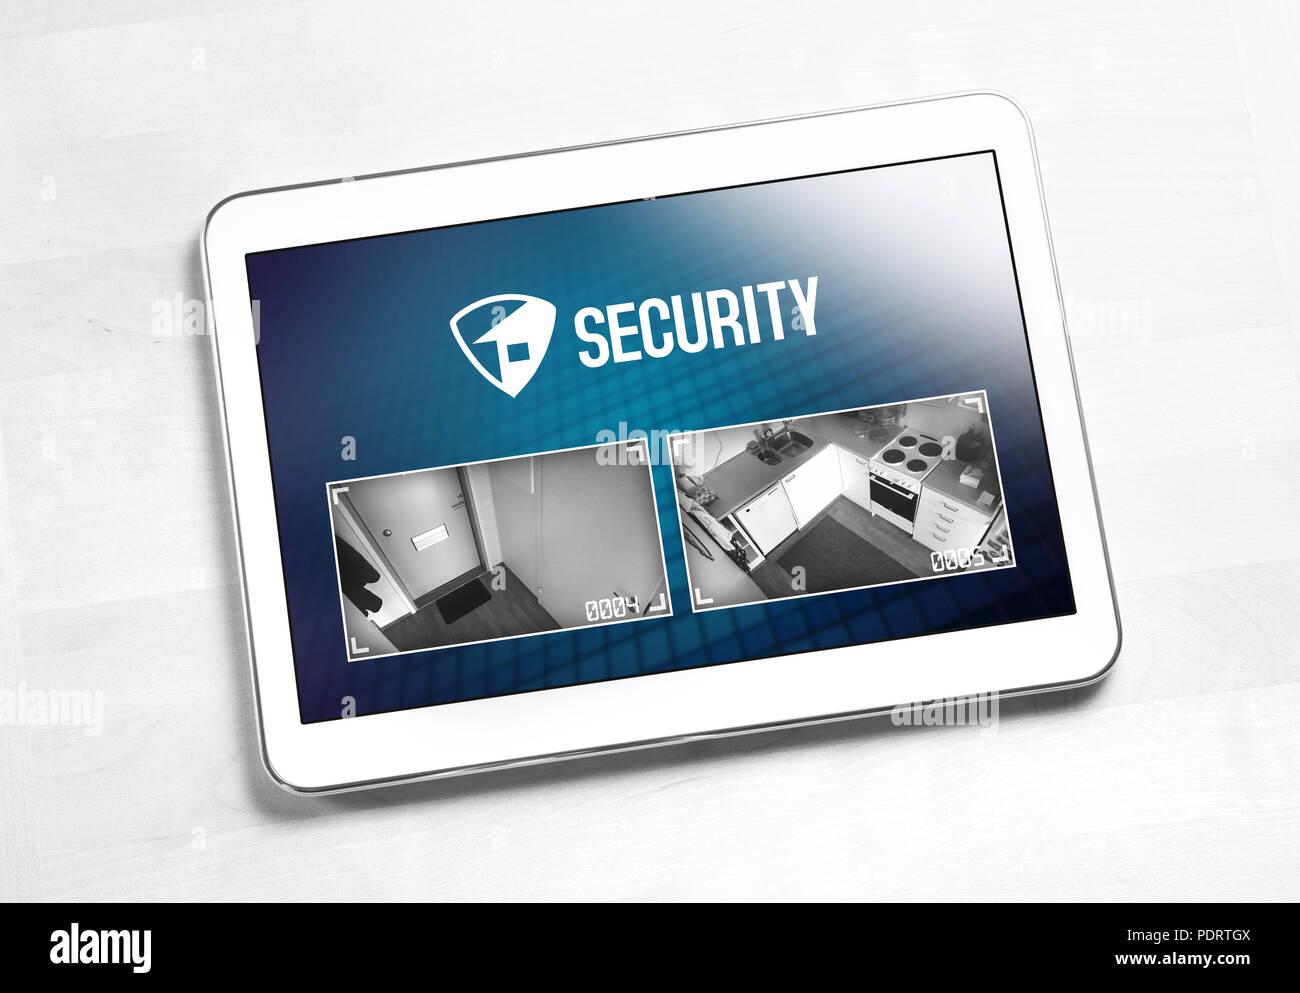 Home security system and application in tablet. Protection and surveillance camera live footage inside a house or apartment. Smart cctv and safety app Stock Photo